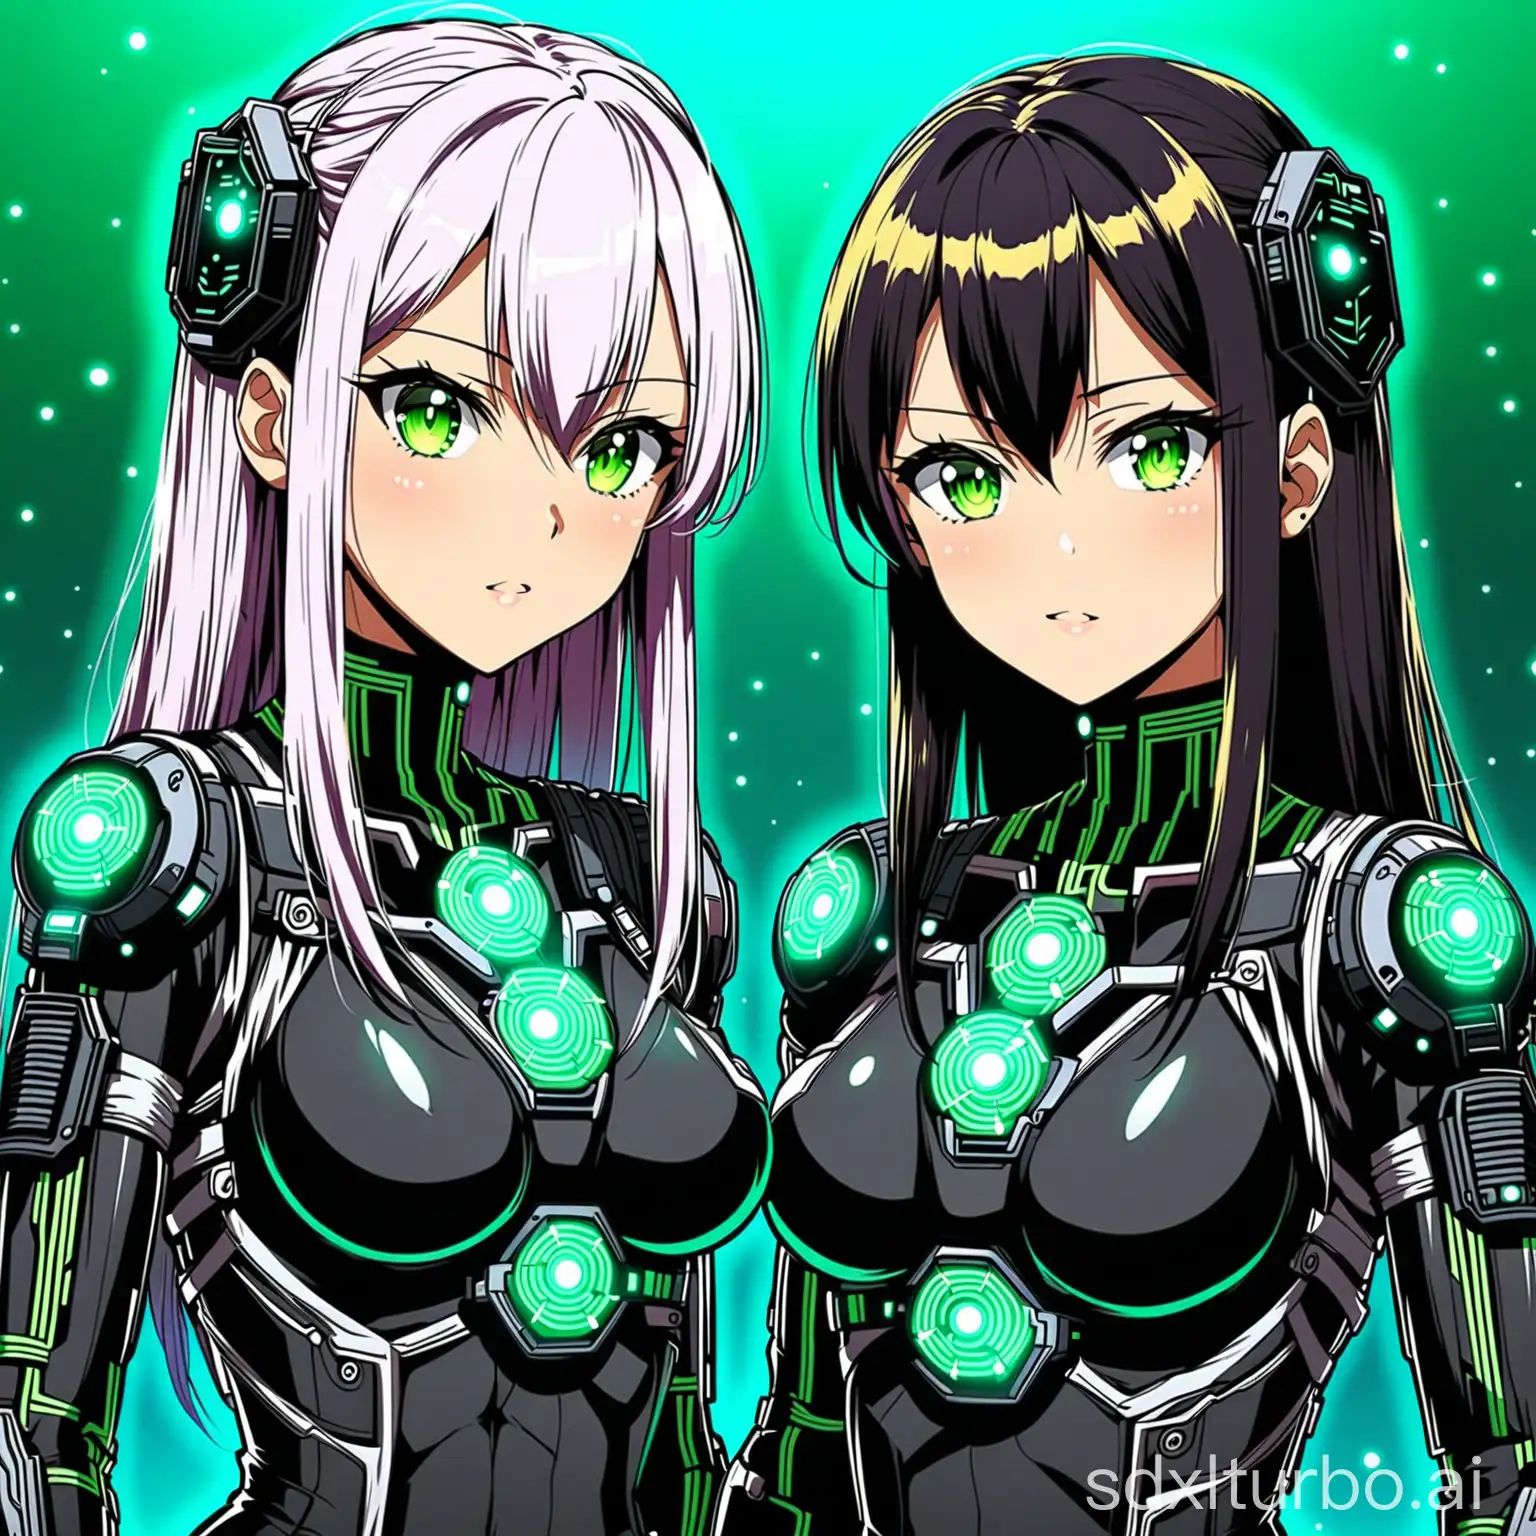 AnimeStyle-Borg-Girls-Futuristic-Cybernetic-Characters-with-Japanese-Animation-Flair